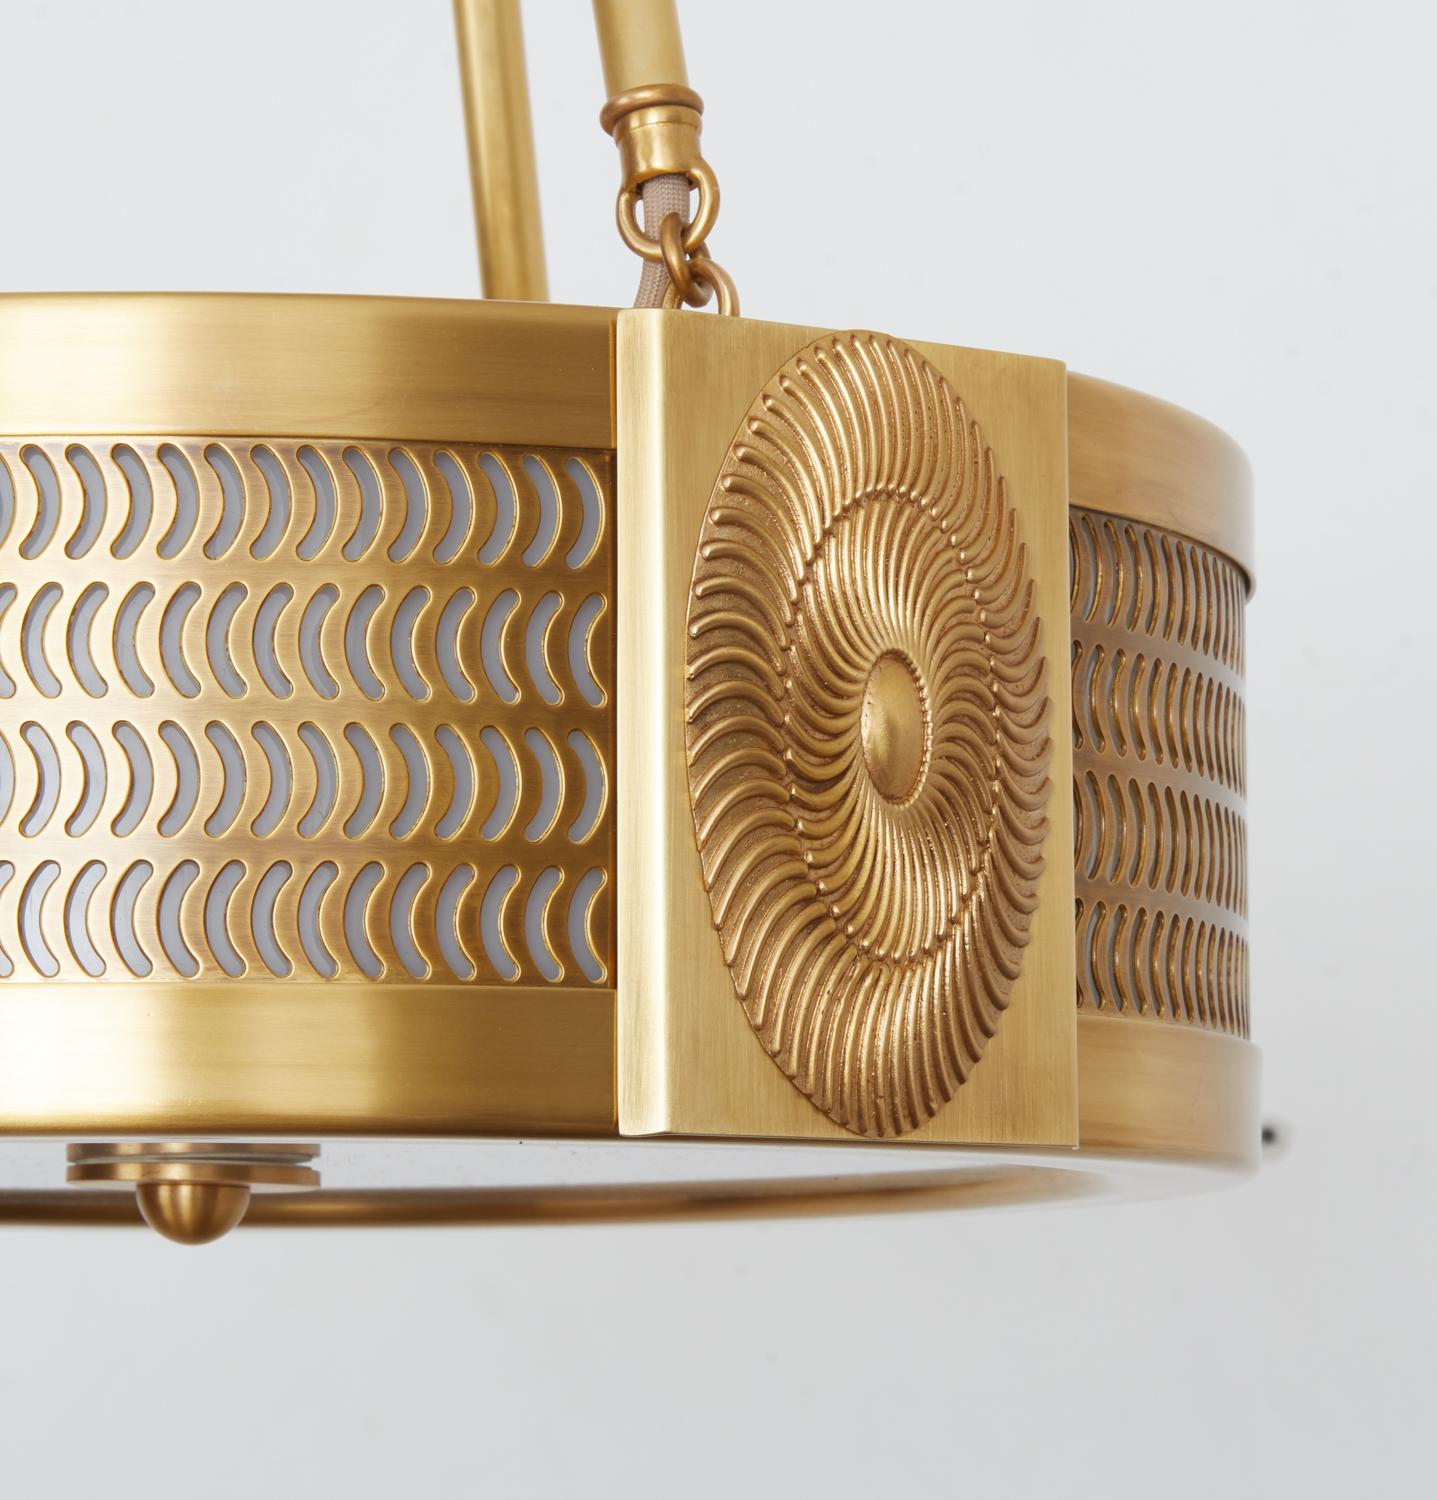 A new, contemporary David Duncan design. A brass pendant suspended from brass canopy and three rods, with comma-shaped cutouts emitting light through opal plexi diffusers on the sides. The frame is divided into three sections, with over-scaled oval,